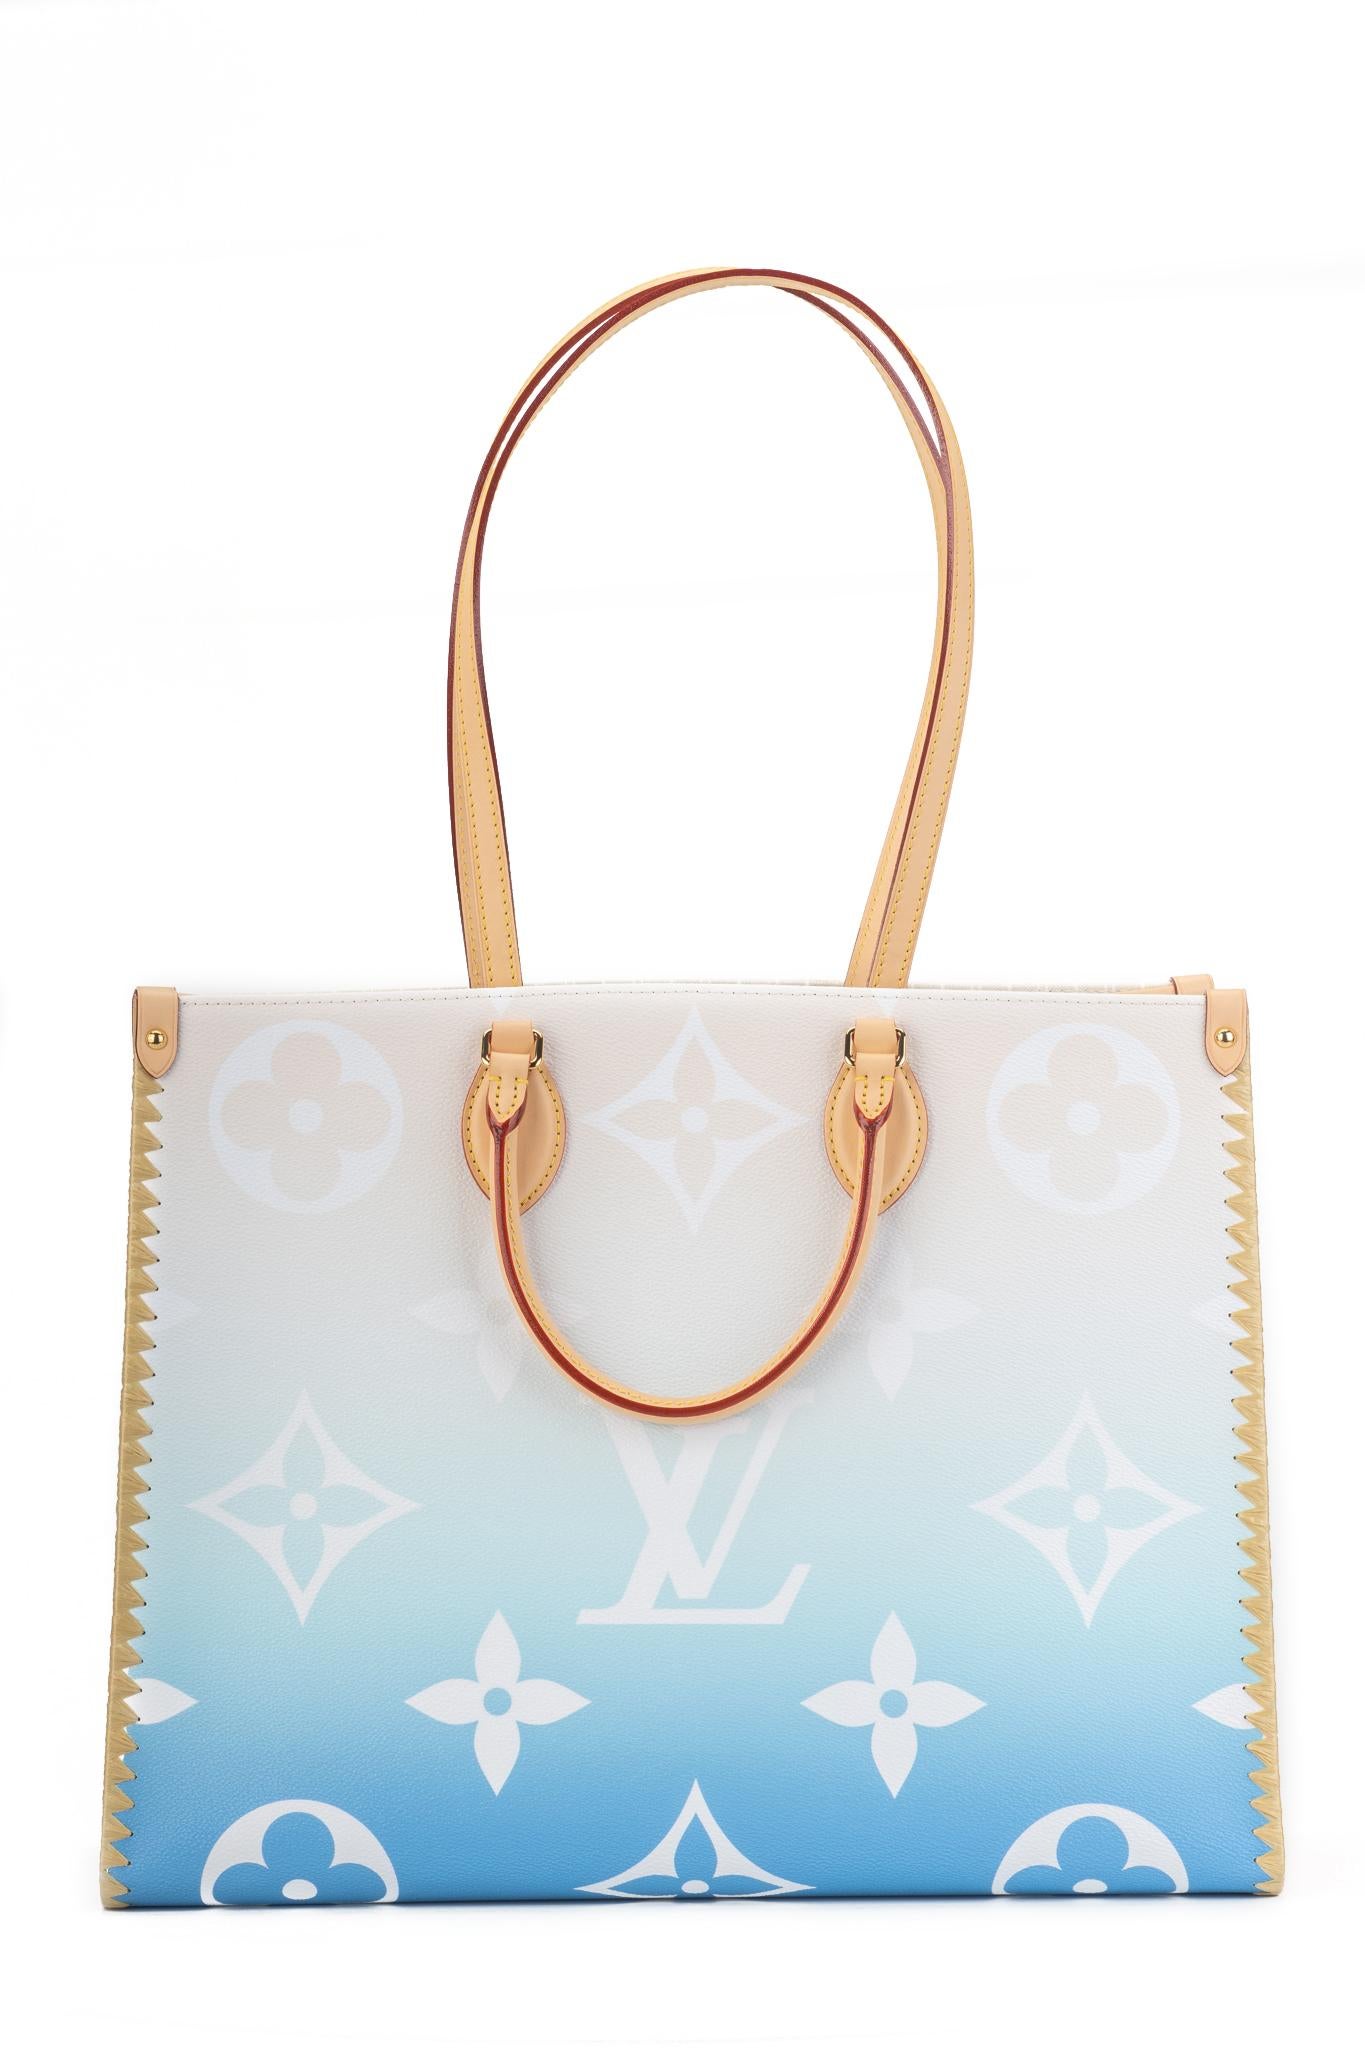 Louis Vuitton 2021 limited edition Summer collection. Saint Tropez ultra limited VIP edition. Brand new in box with original dust cover. Large on the go in ombre pink monogram canvas. Sides are made of raffia, cowhide trims and straps, flower charm.